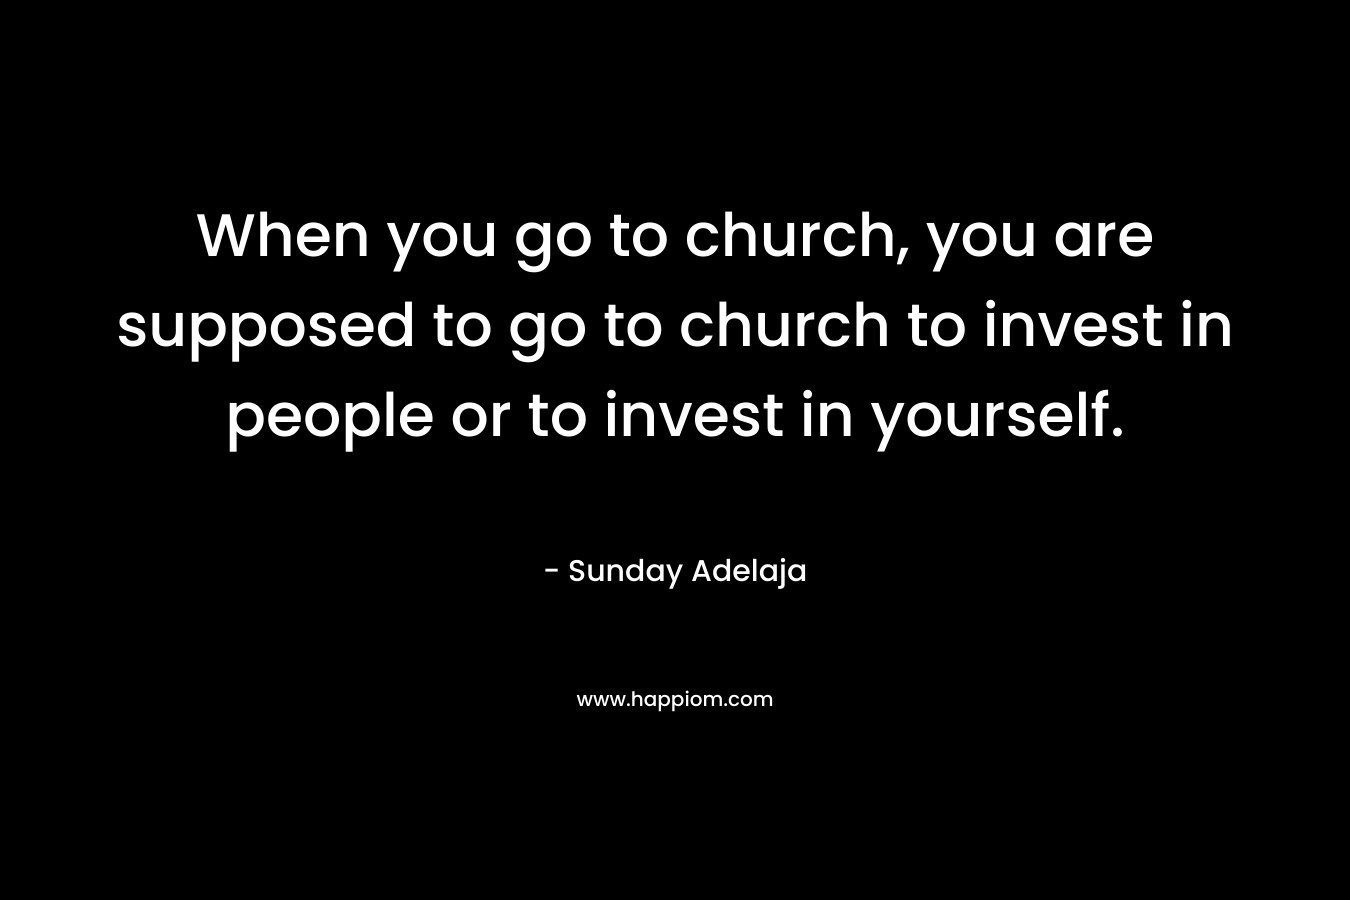 When you go to church, you are supposed to go to church to invest in people or to invest in yourself.